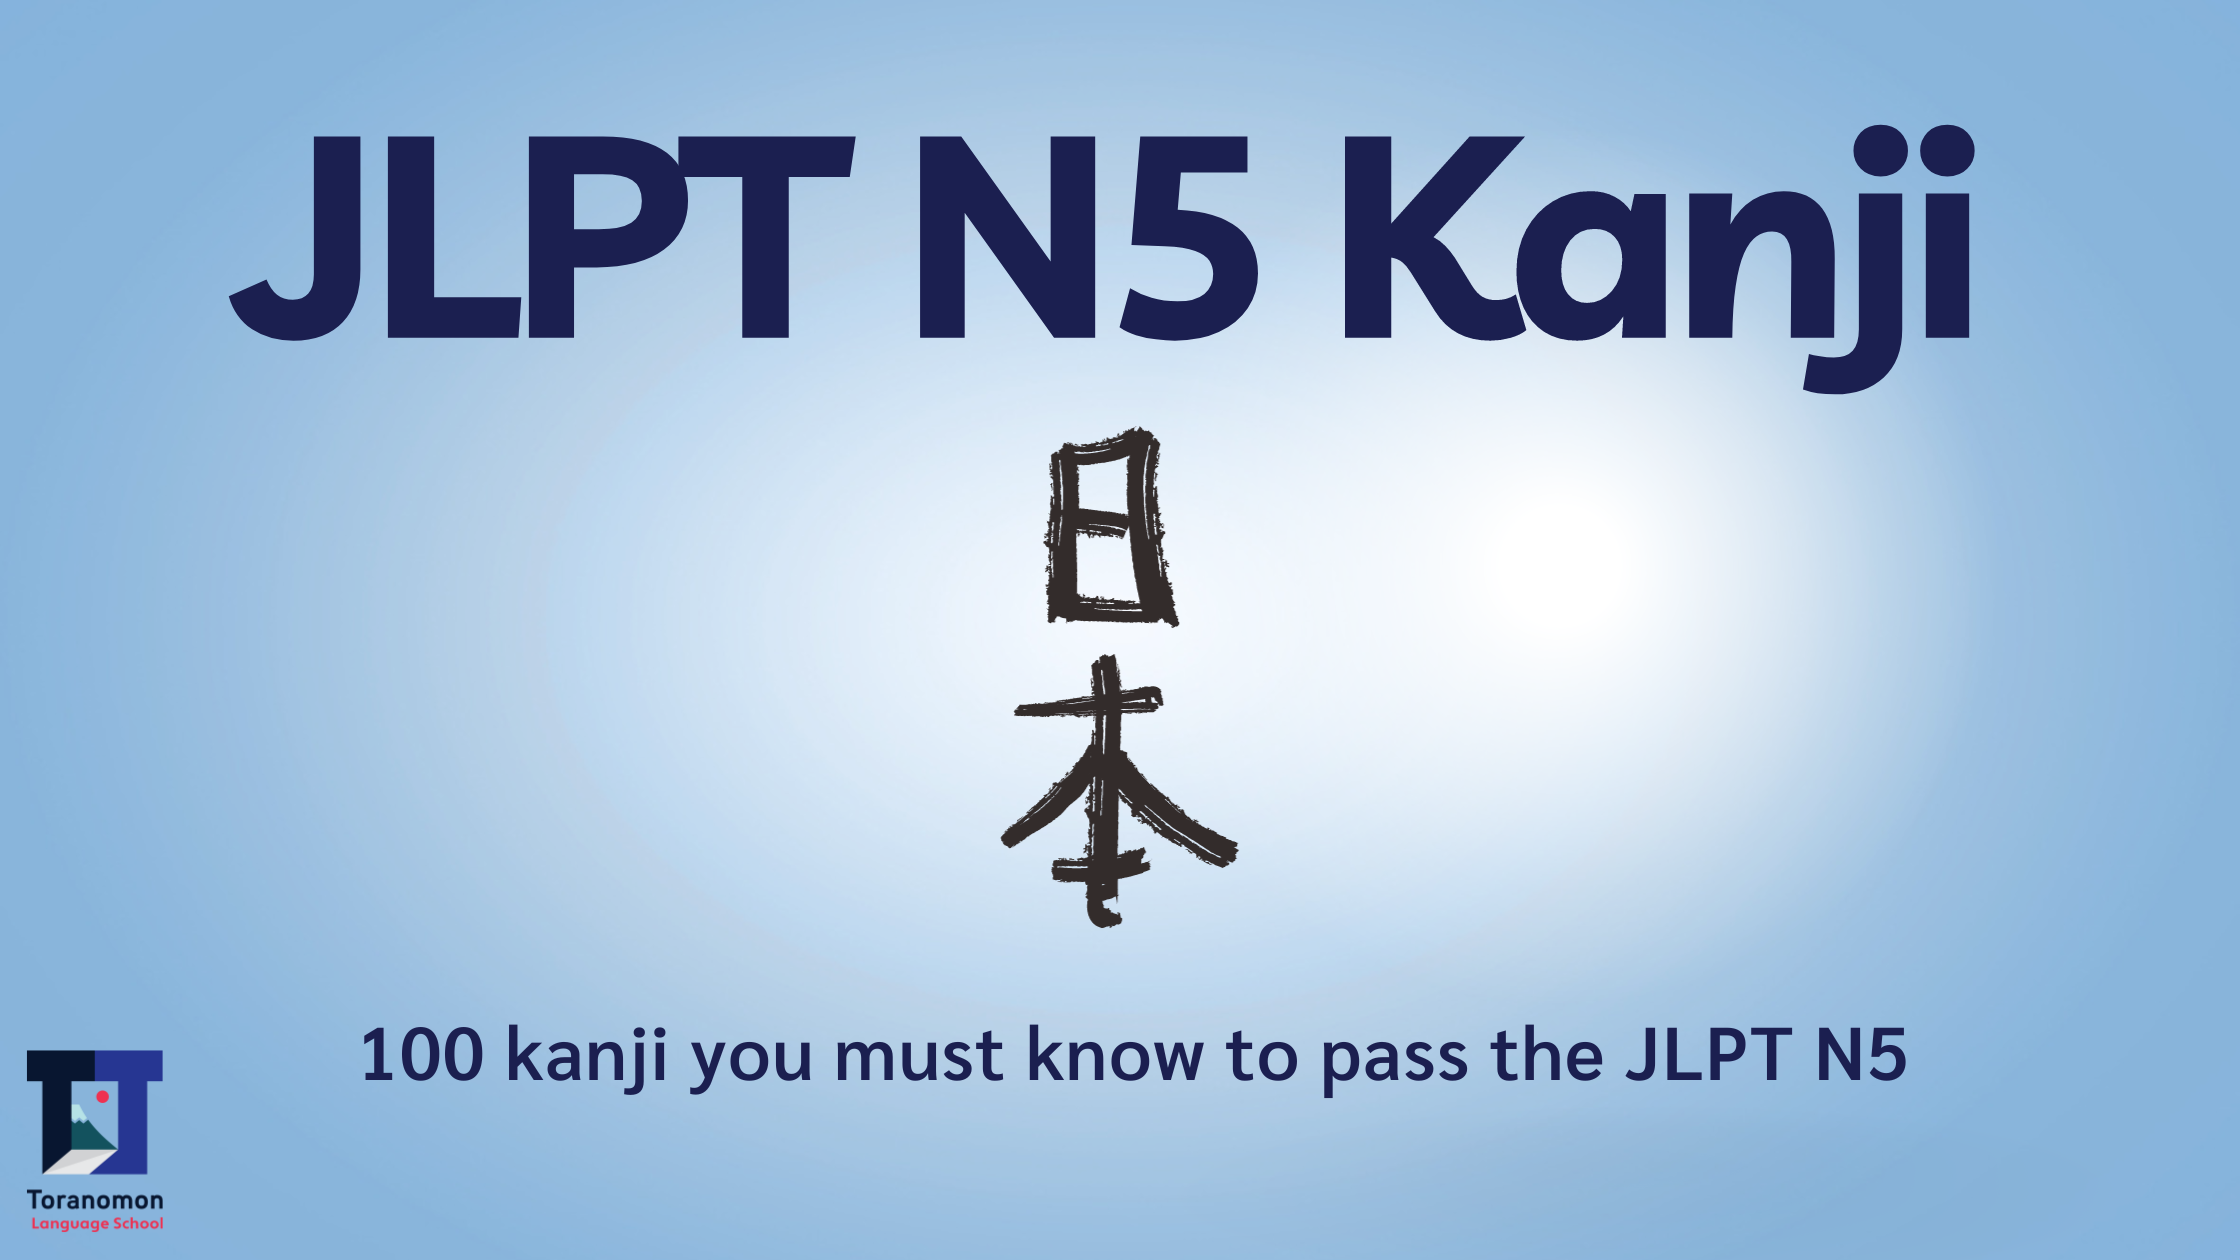 What Kanji do You Need to Know to Pass the JLPT N5?